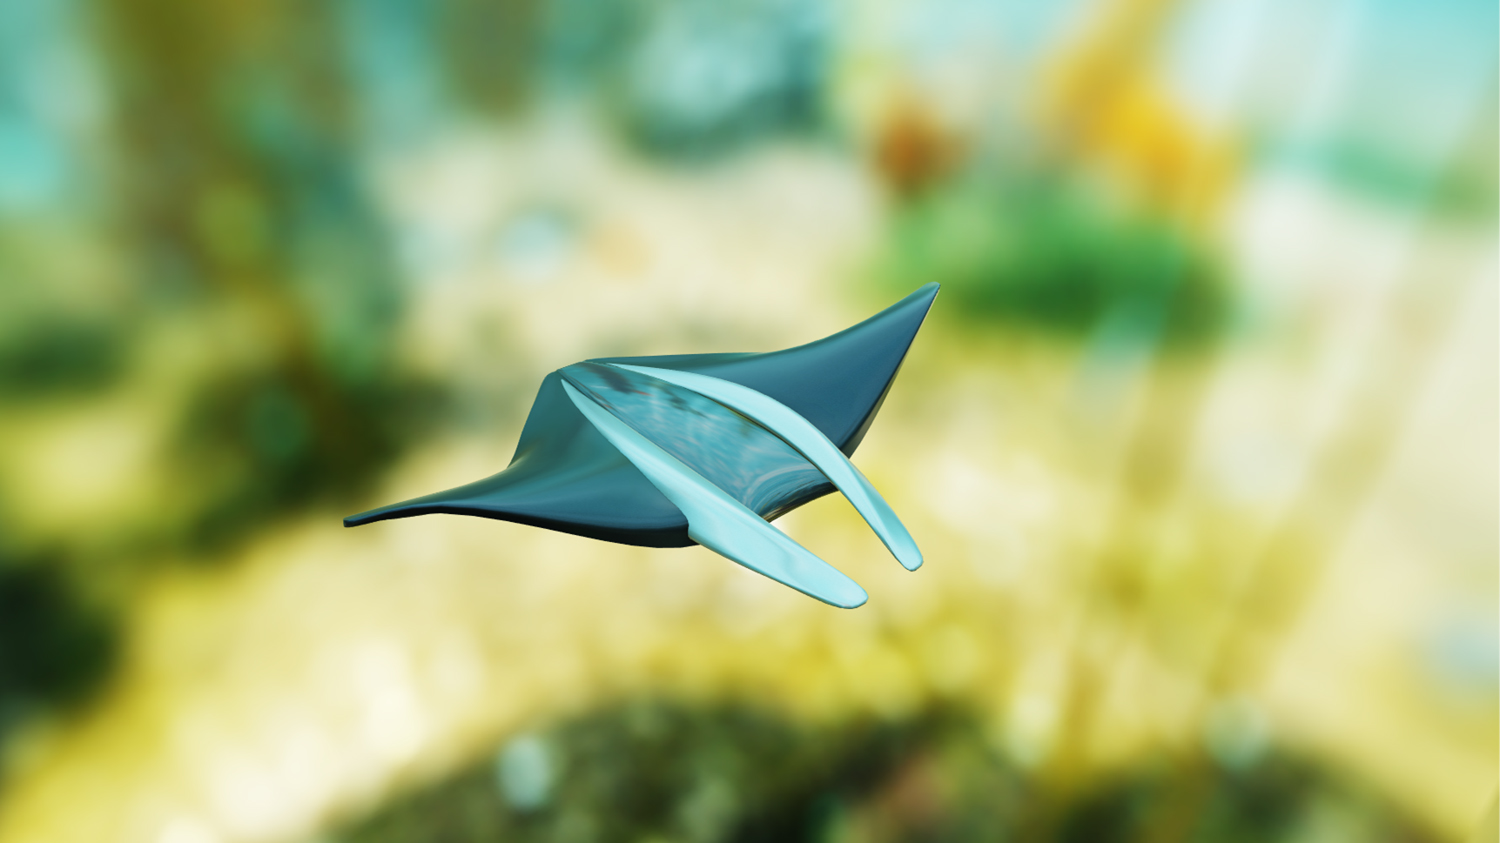 Prototype modeled on a ray: In the future, the robot will resemble the streamlined cartilaginous fish.